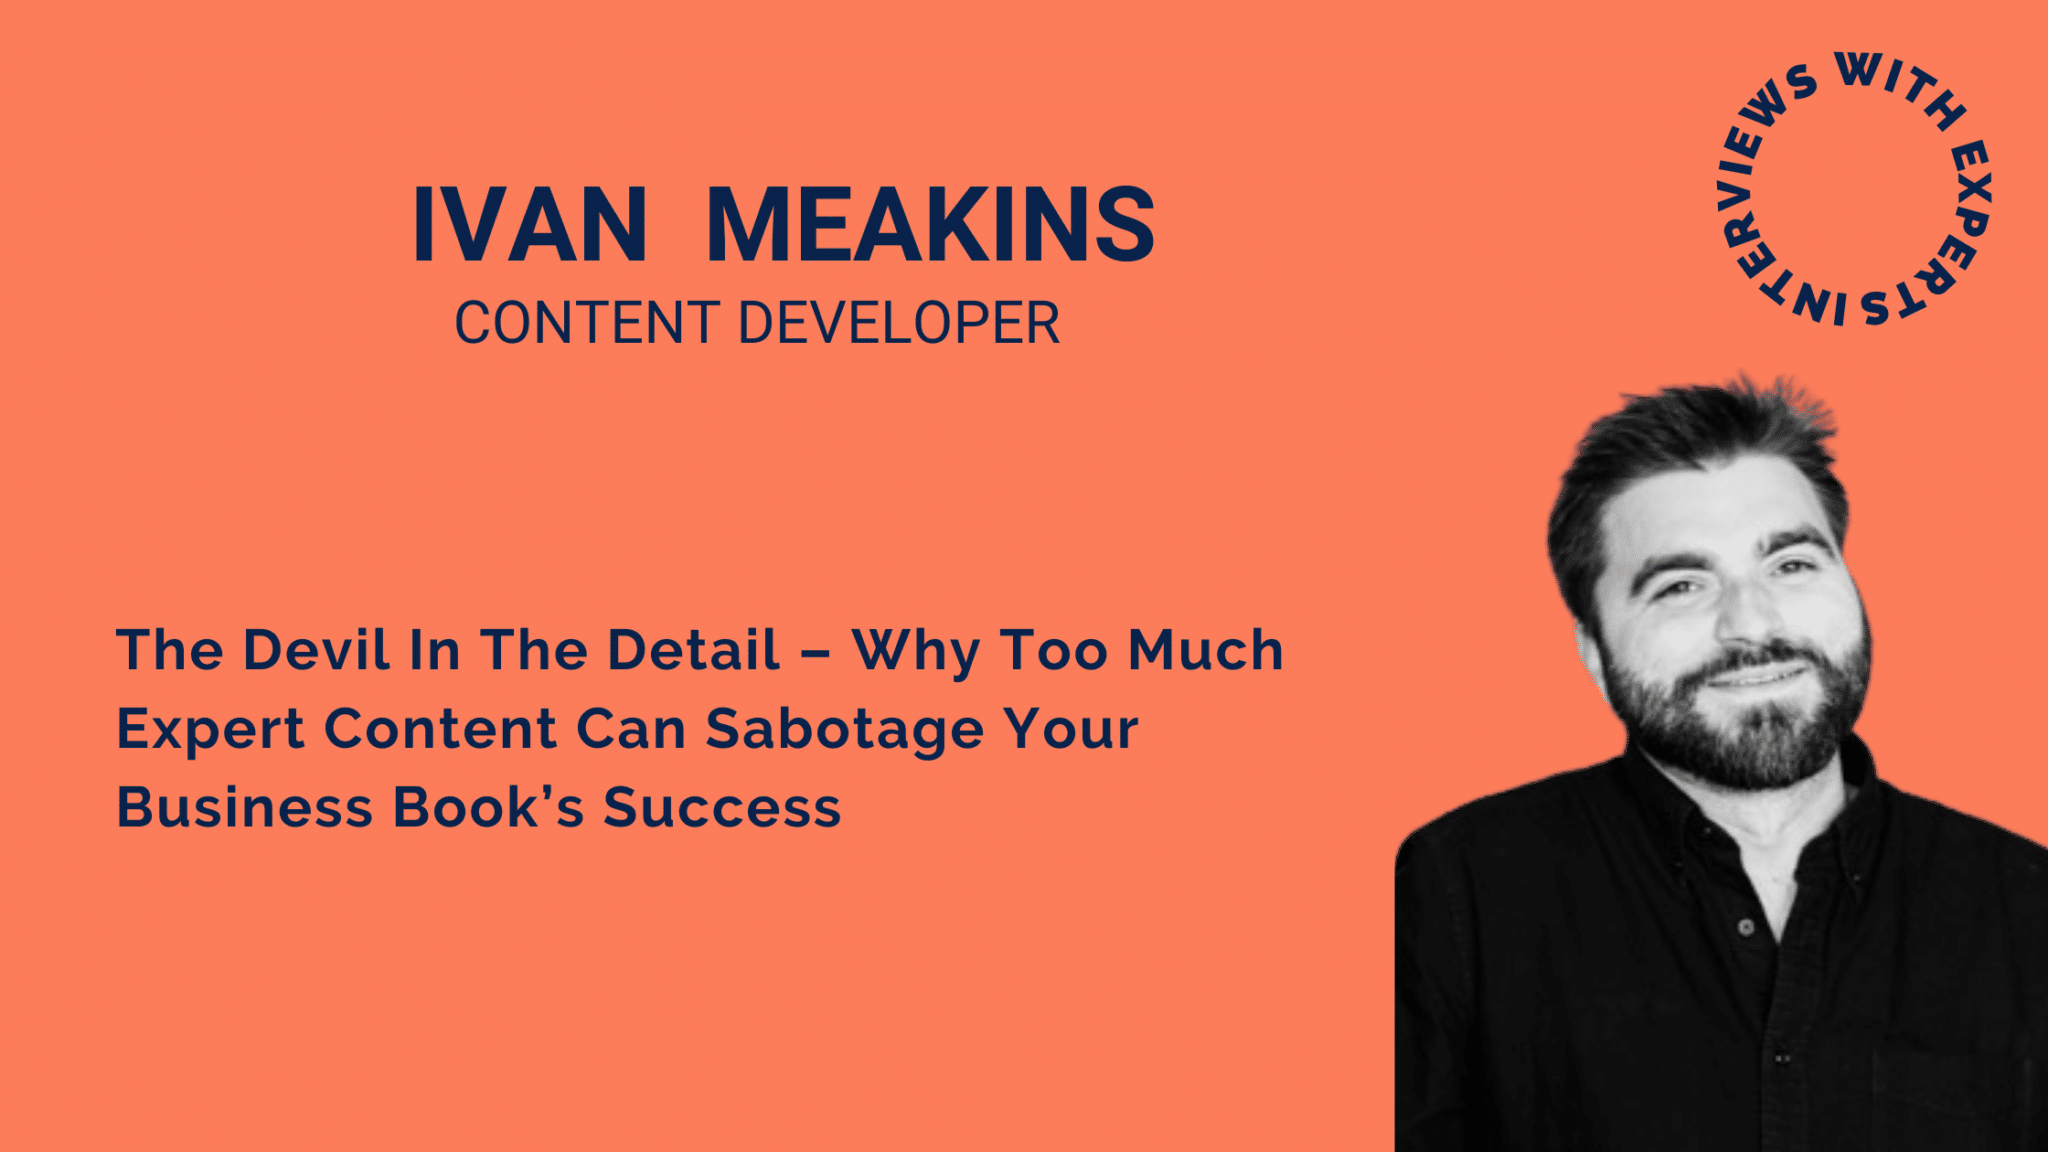 The Devil In The Detail – Why Too Much Expert Content Can Sabotage Your Business Book’s Success  By Ivan Meakins